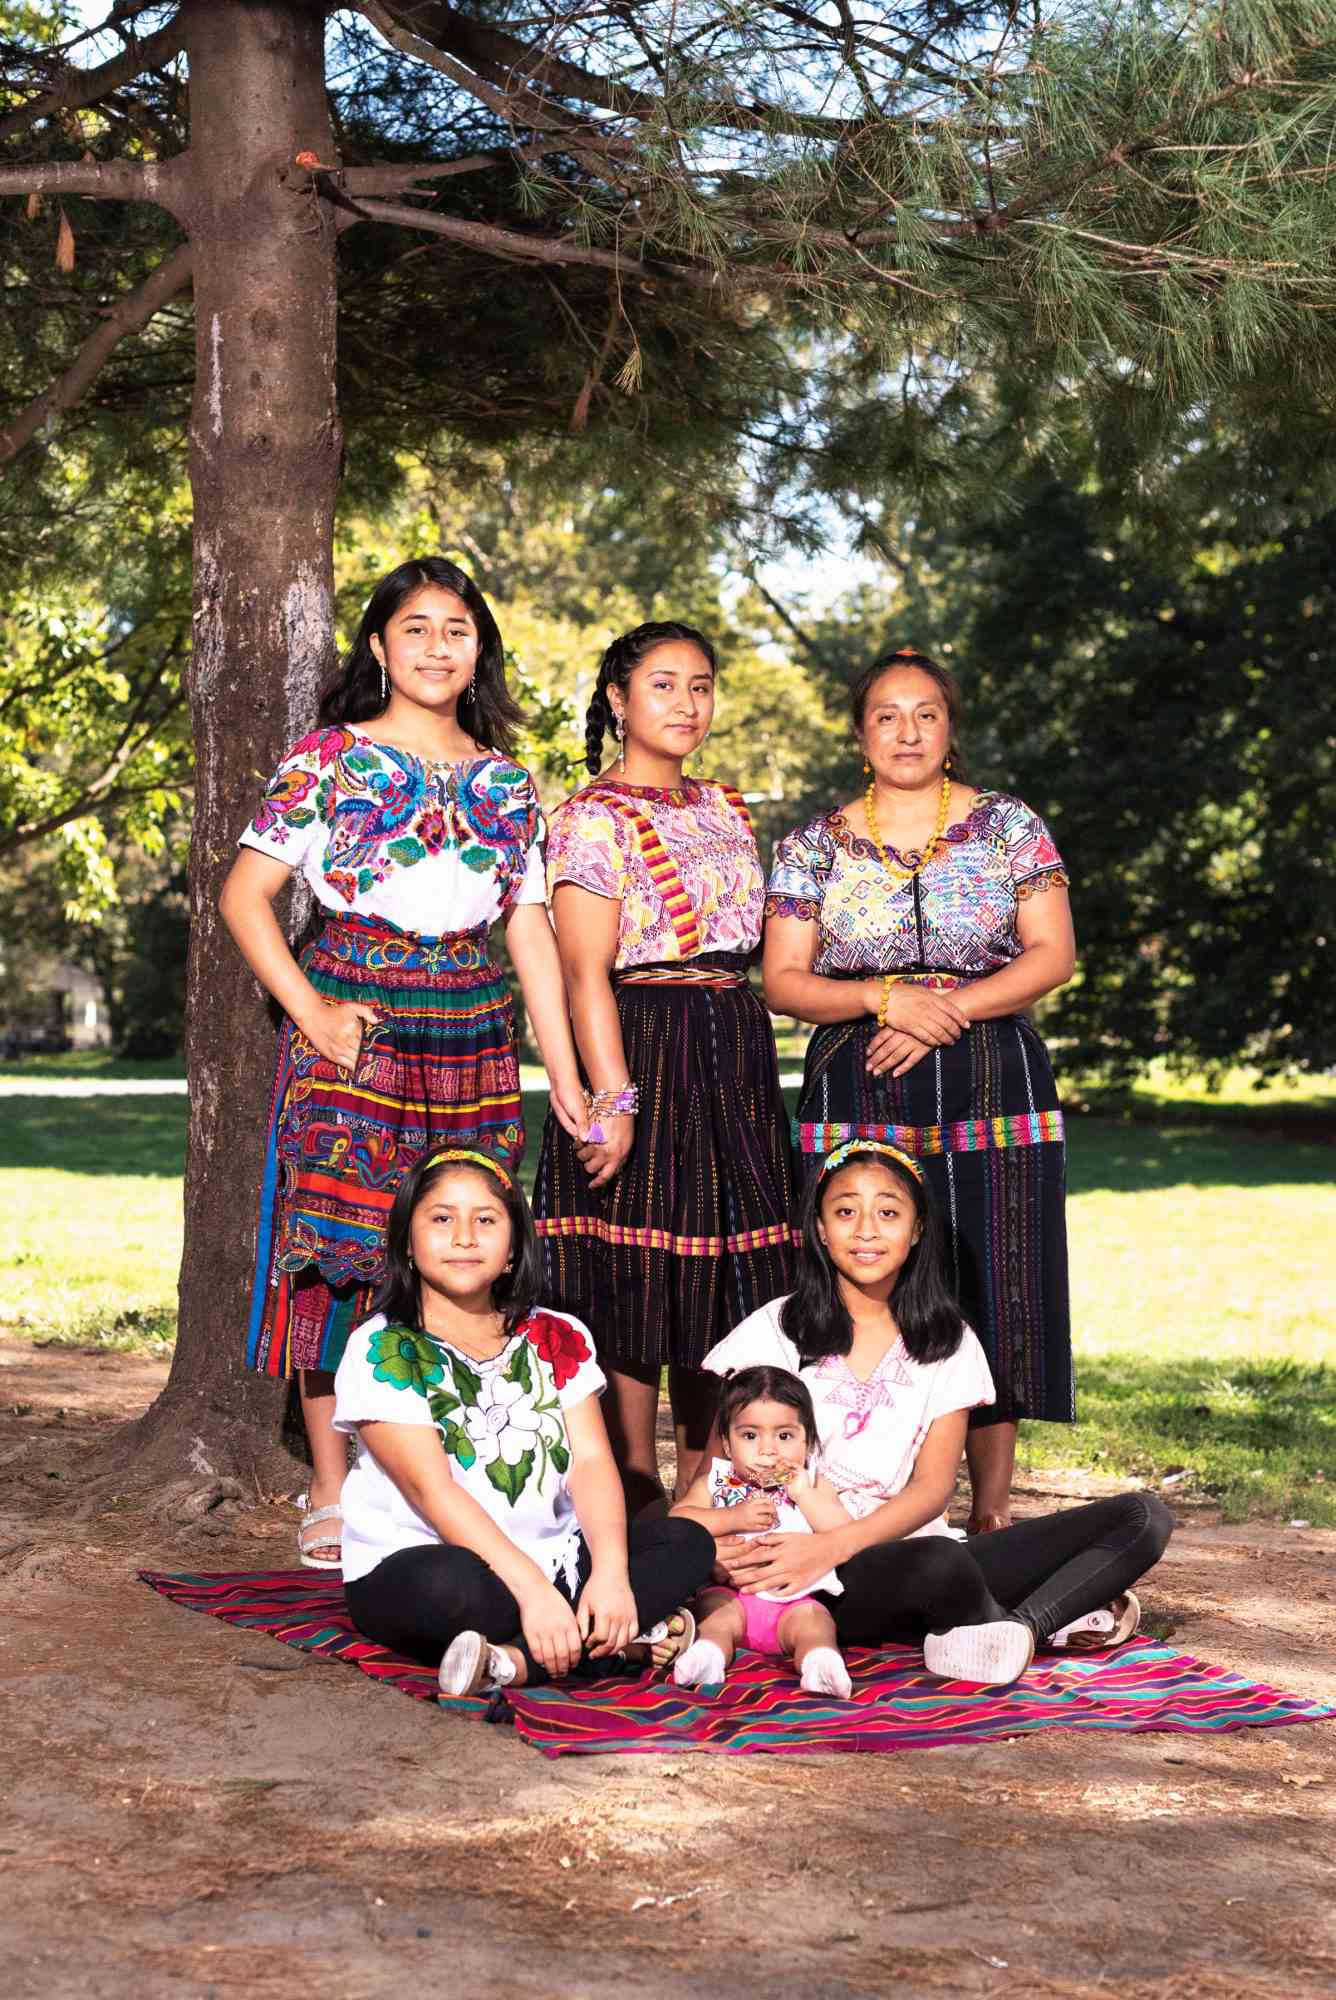 An image of Martina's* family wearing traditional hand-crafted Guatemalan clothes.